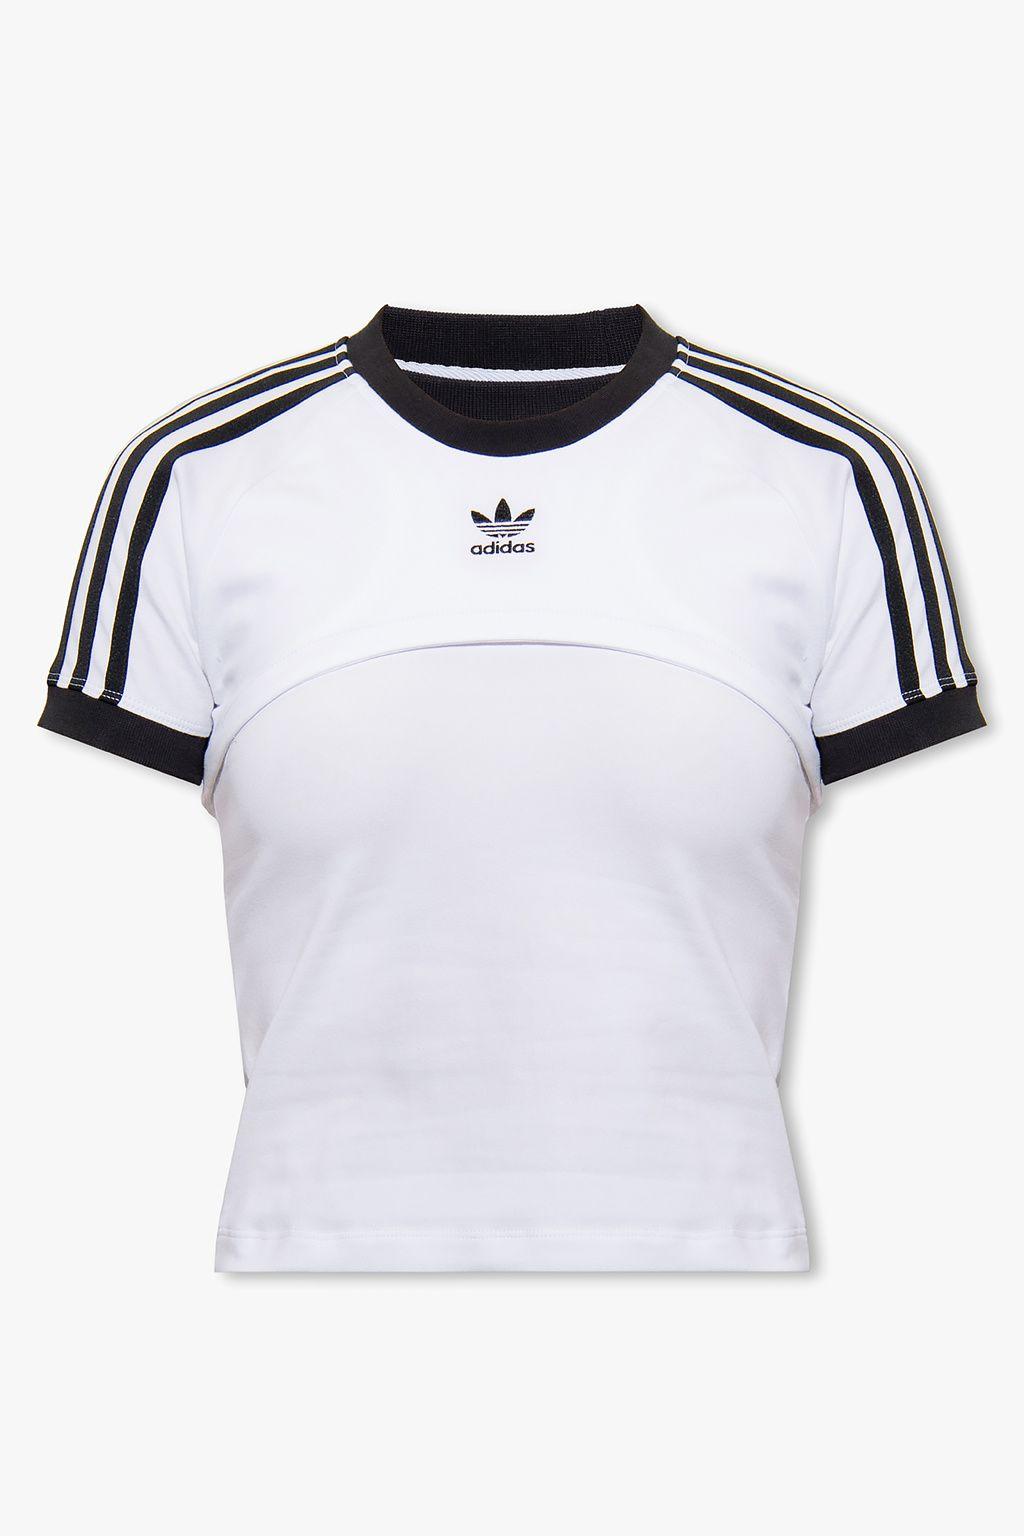 adidas Originals Two-layered Top With Logo in Black | Lyst